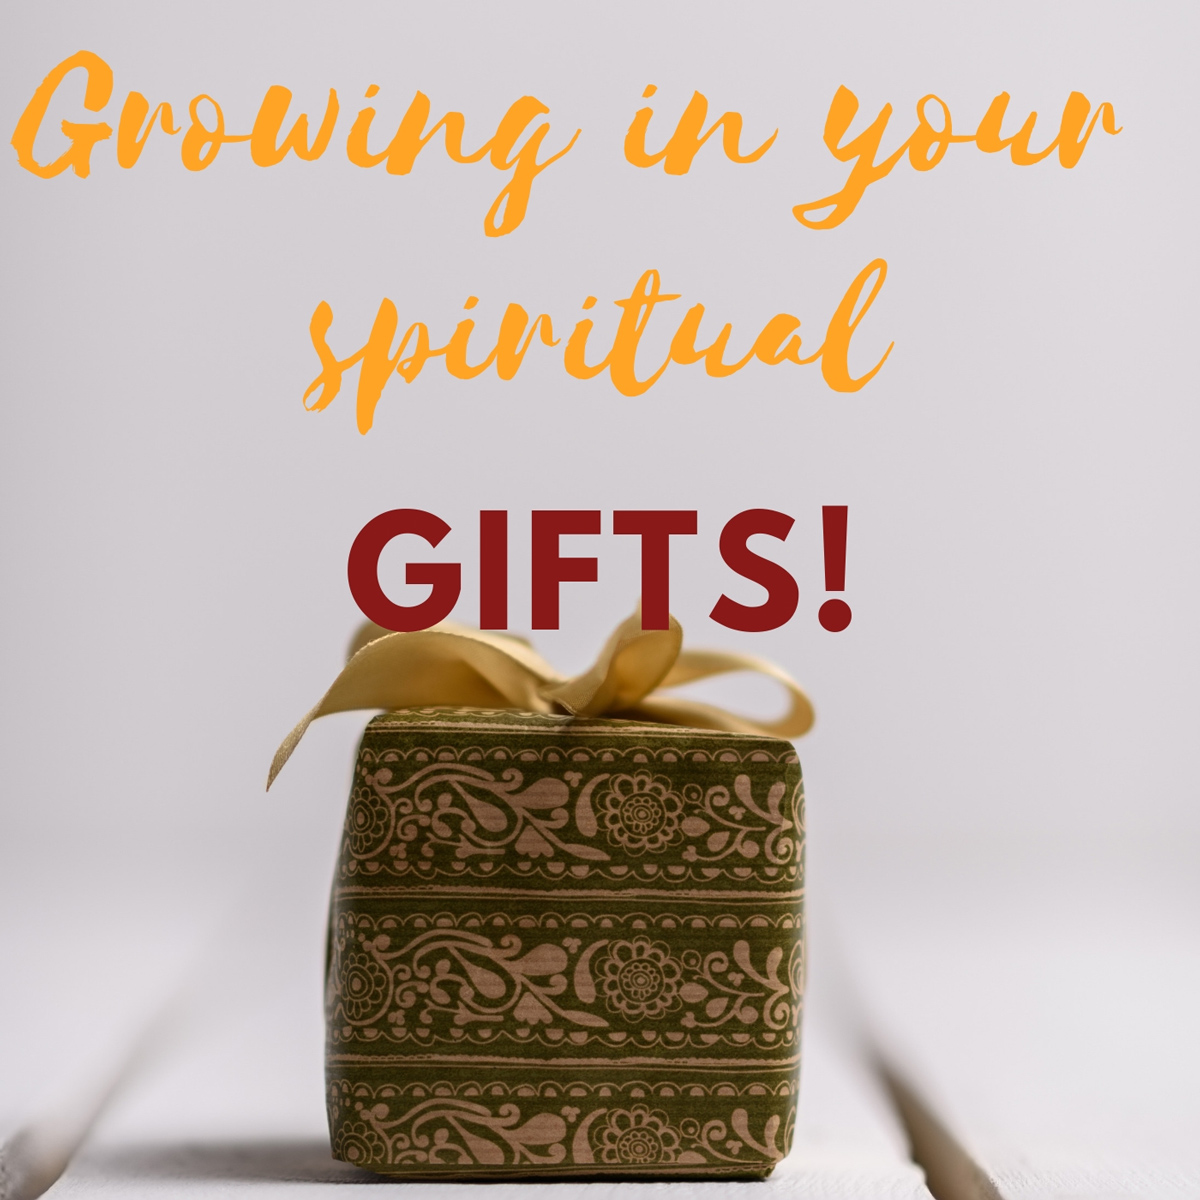 Understanding and growing in your Spiritual Gifts